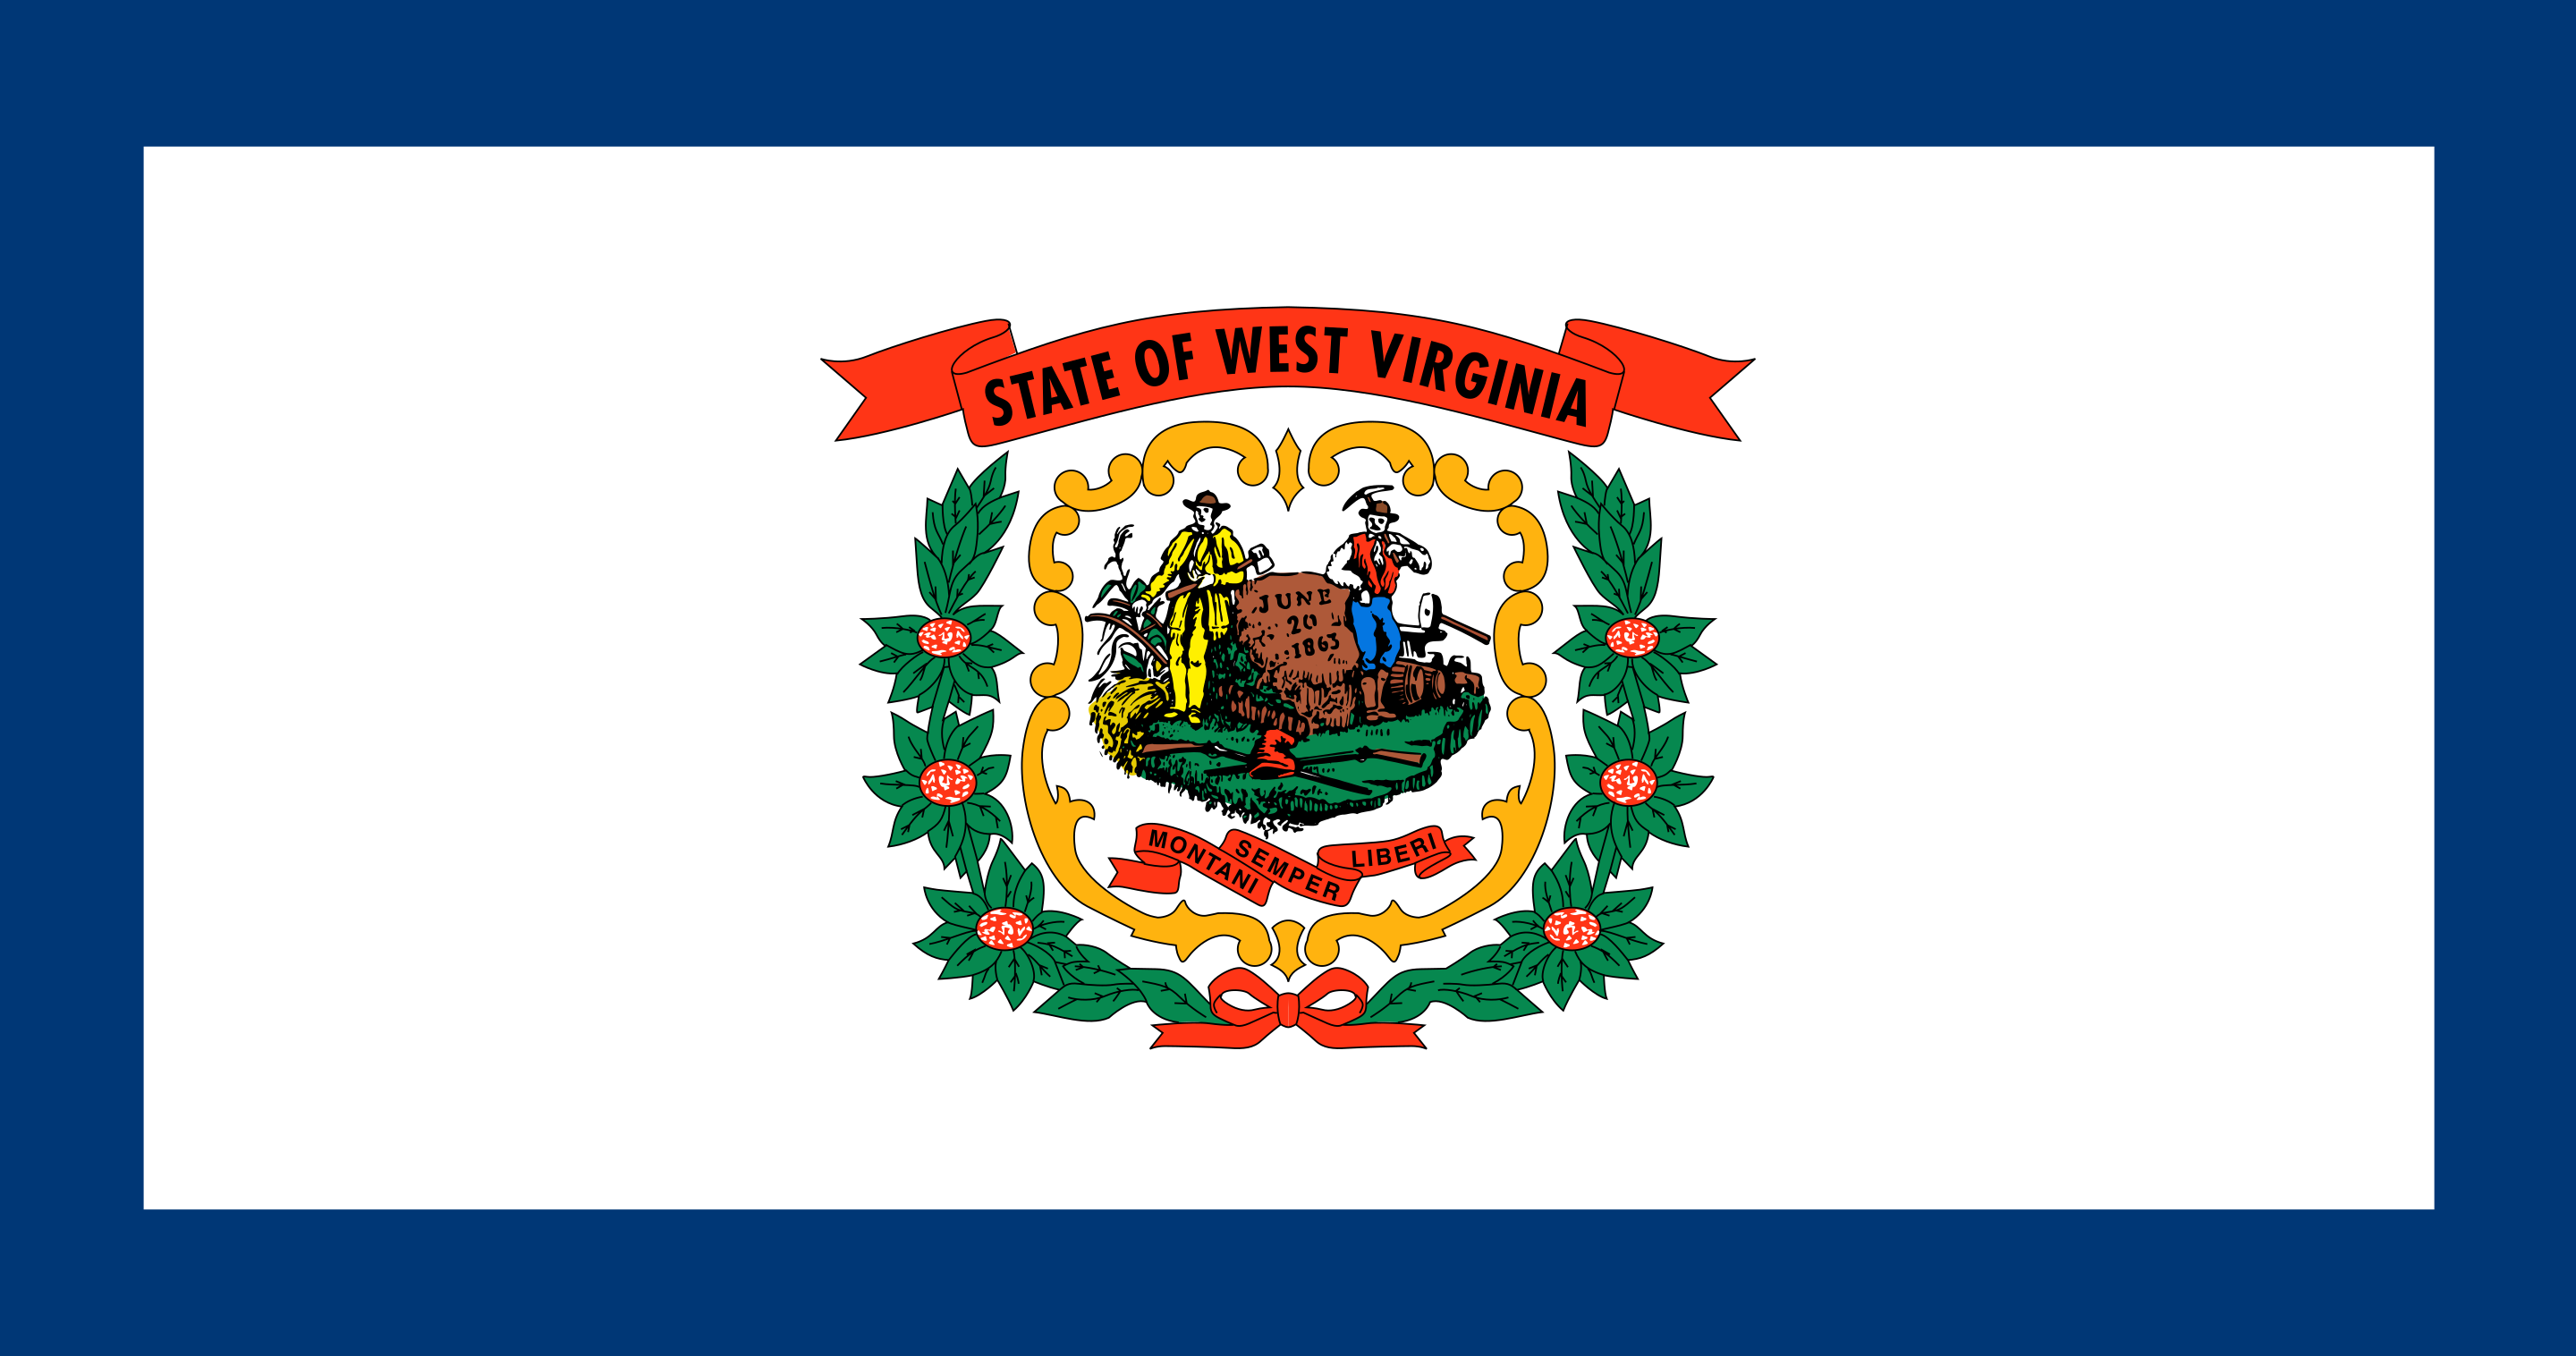 West Virginia is the most recent state to protect citizen privacy!